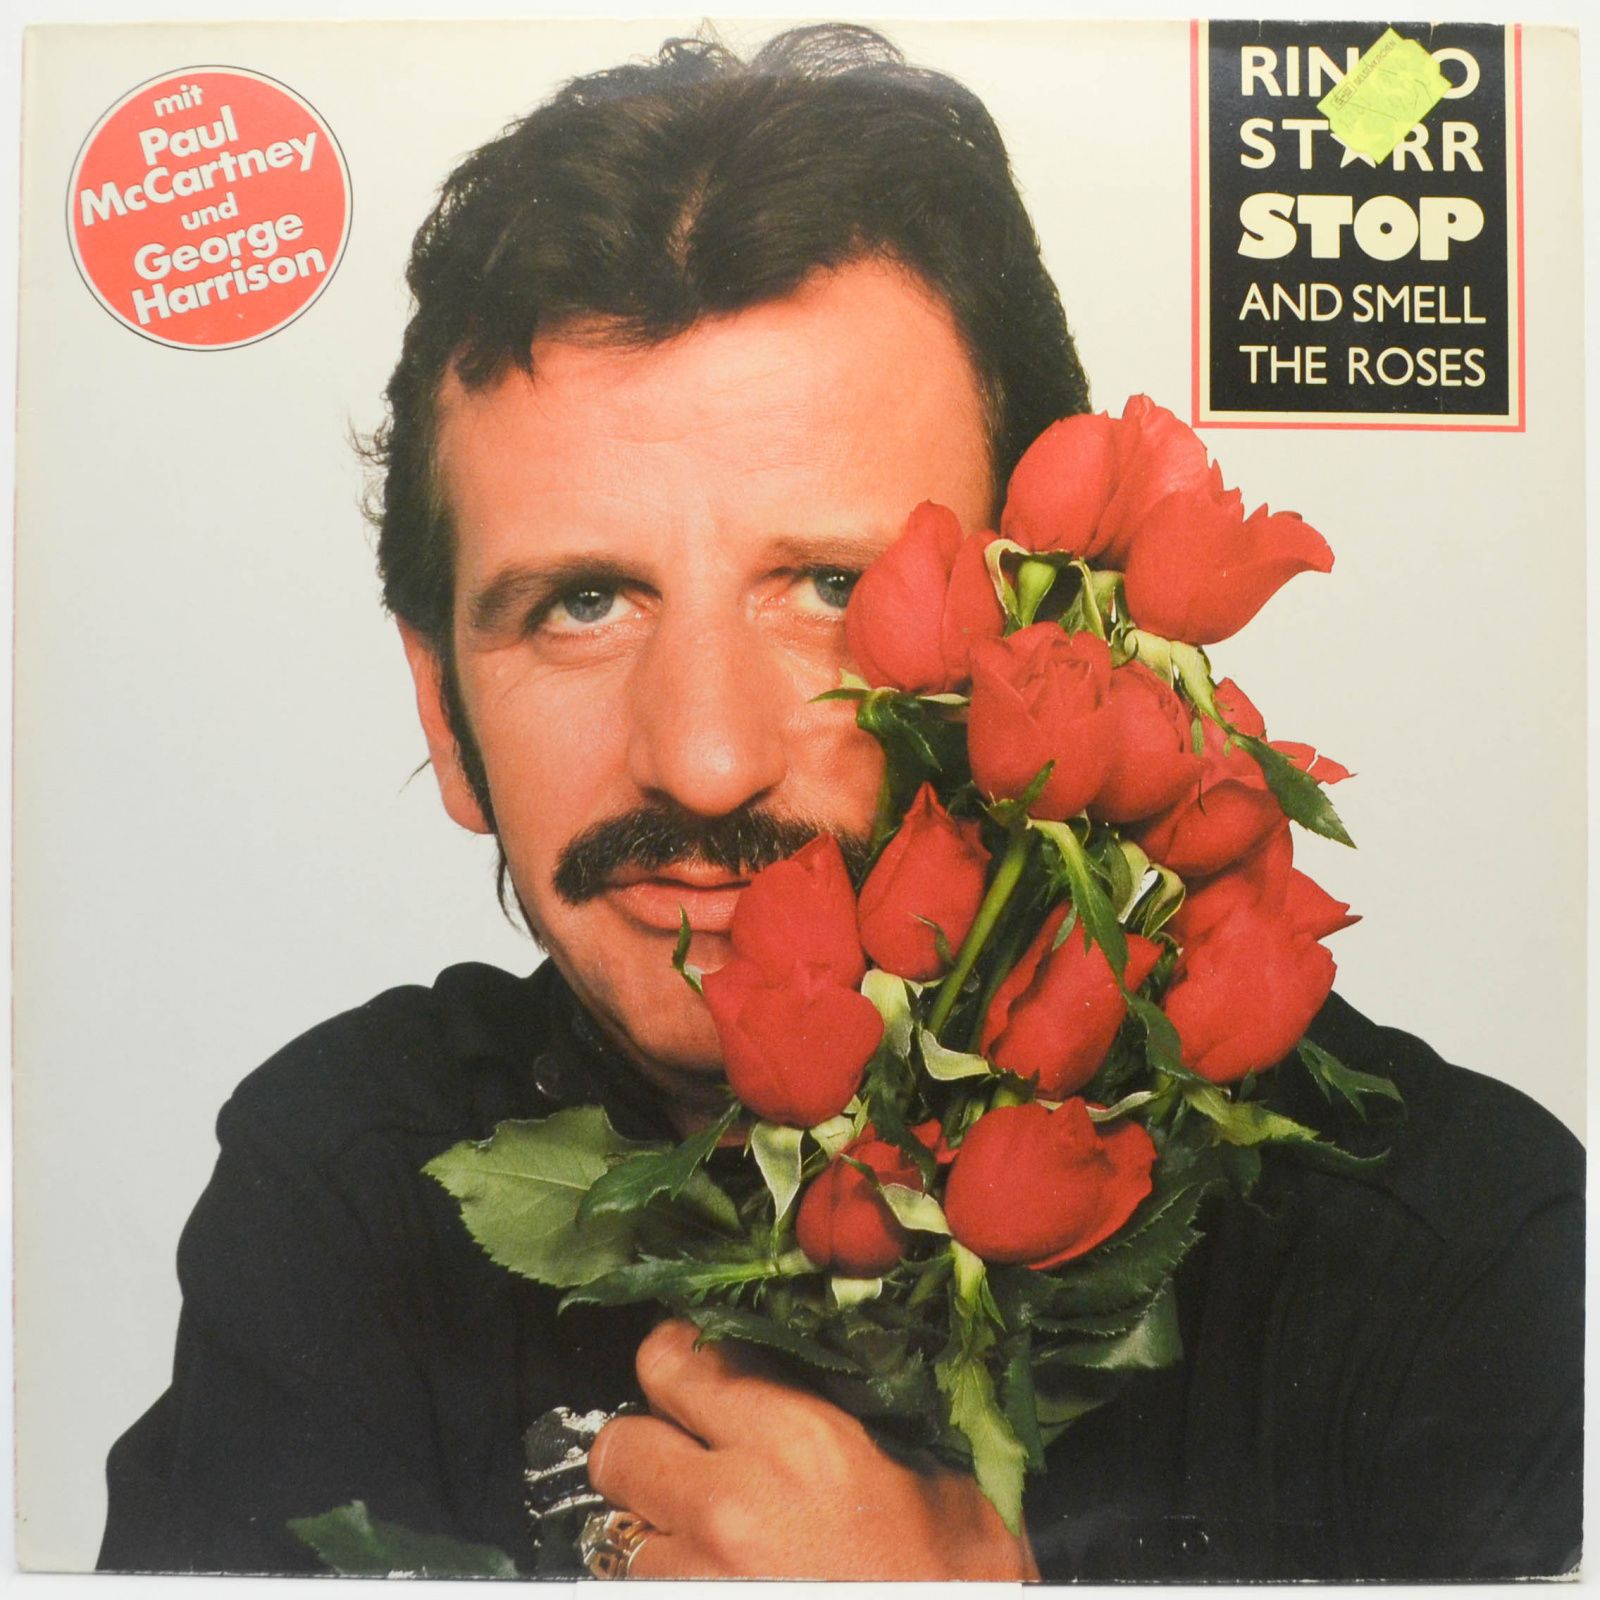 Ringo Starr — Stop And Smell The Roses, 1981